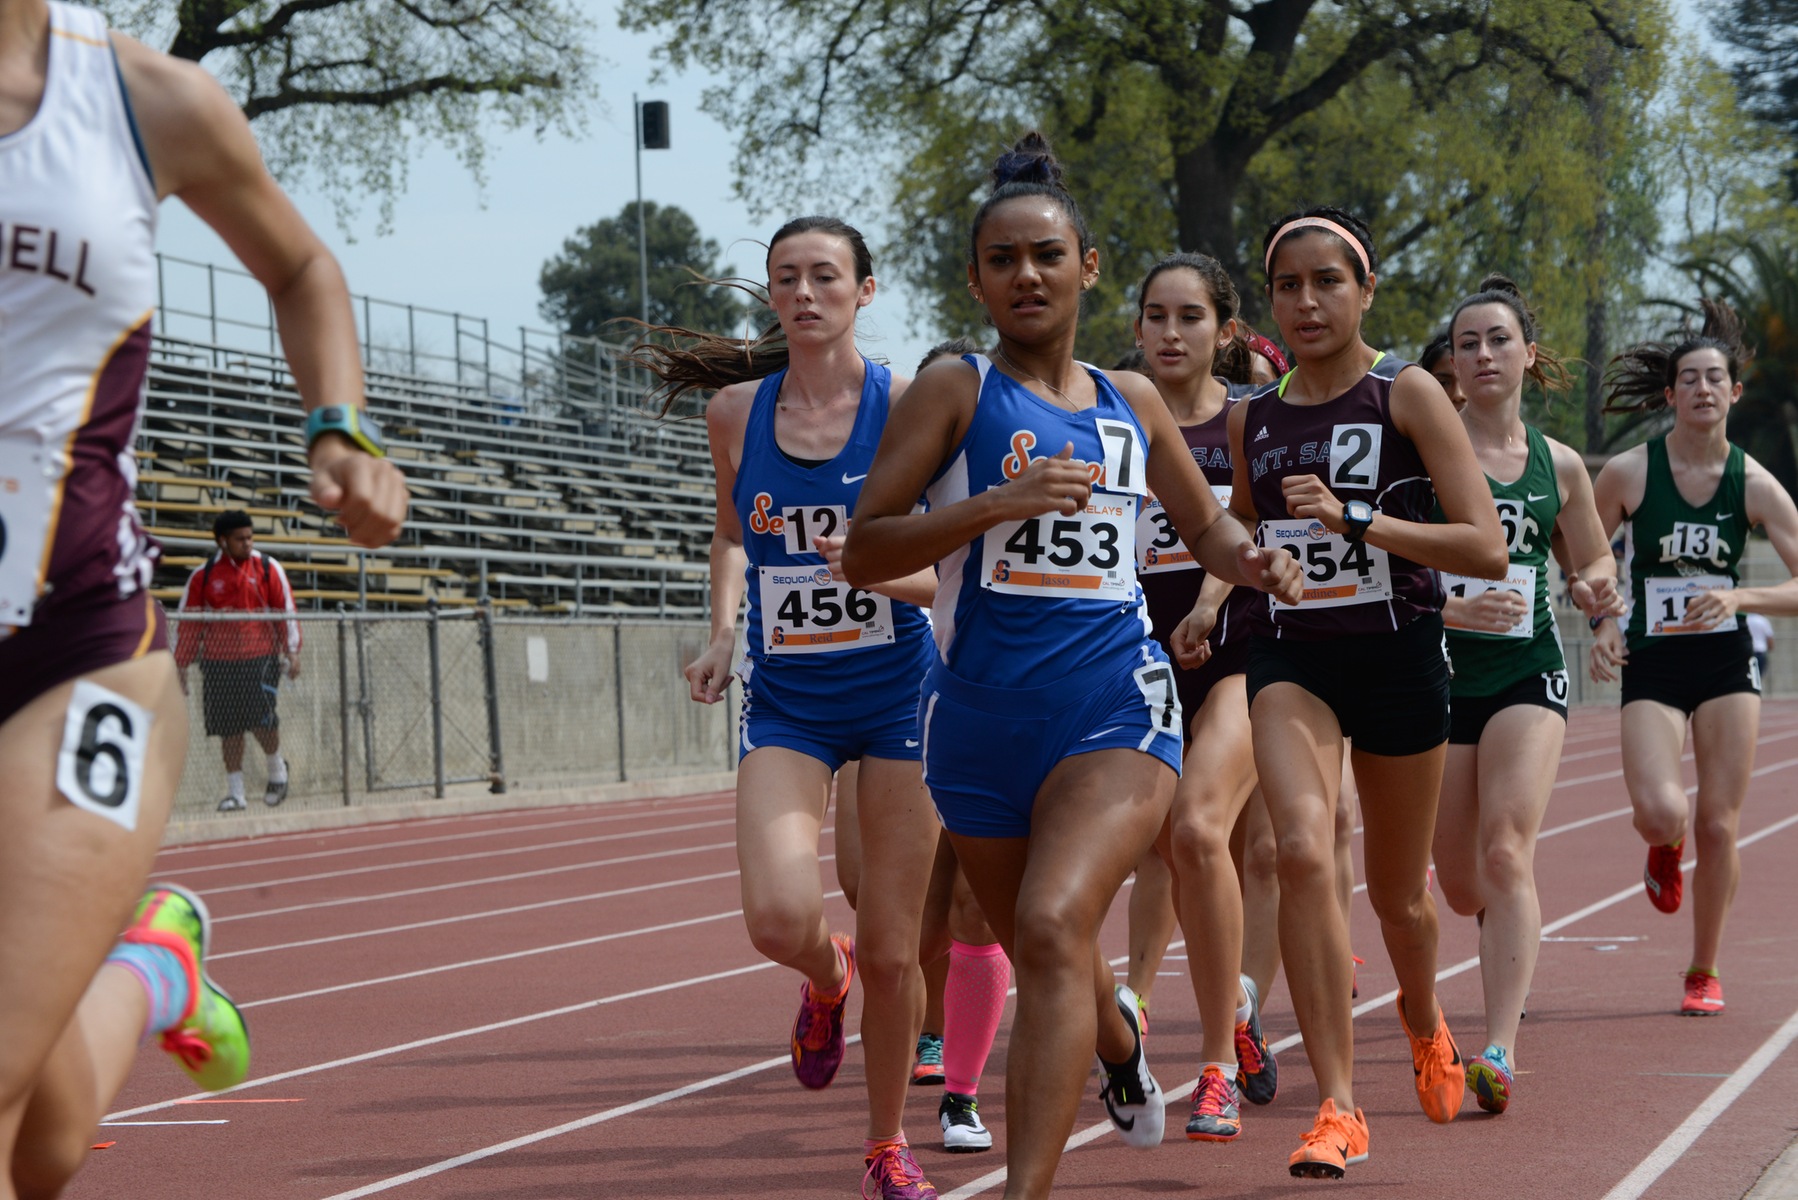 Giants compete against Olympian and former COS track star in Mt. Sac Relays